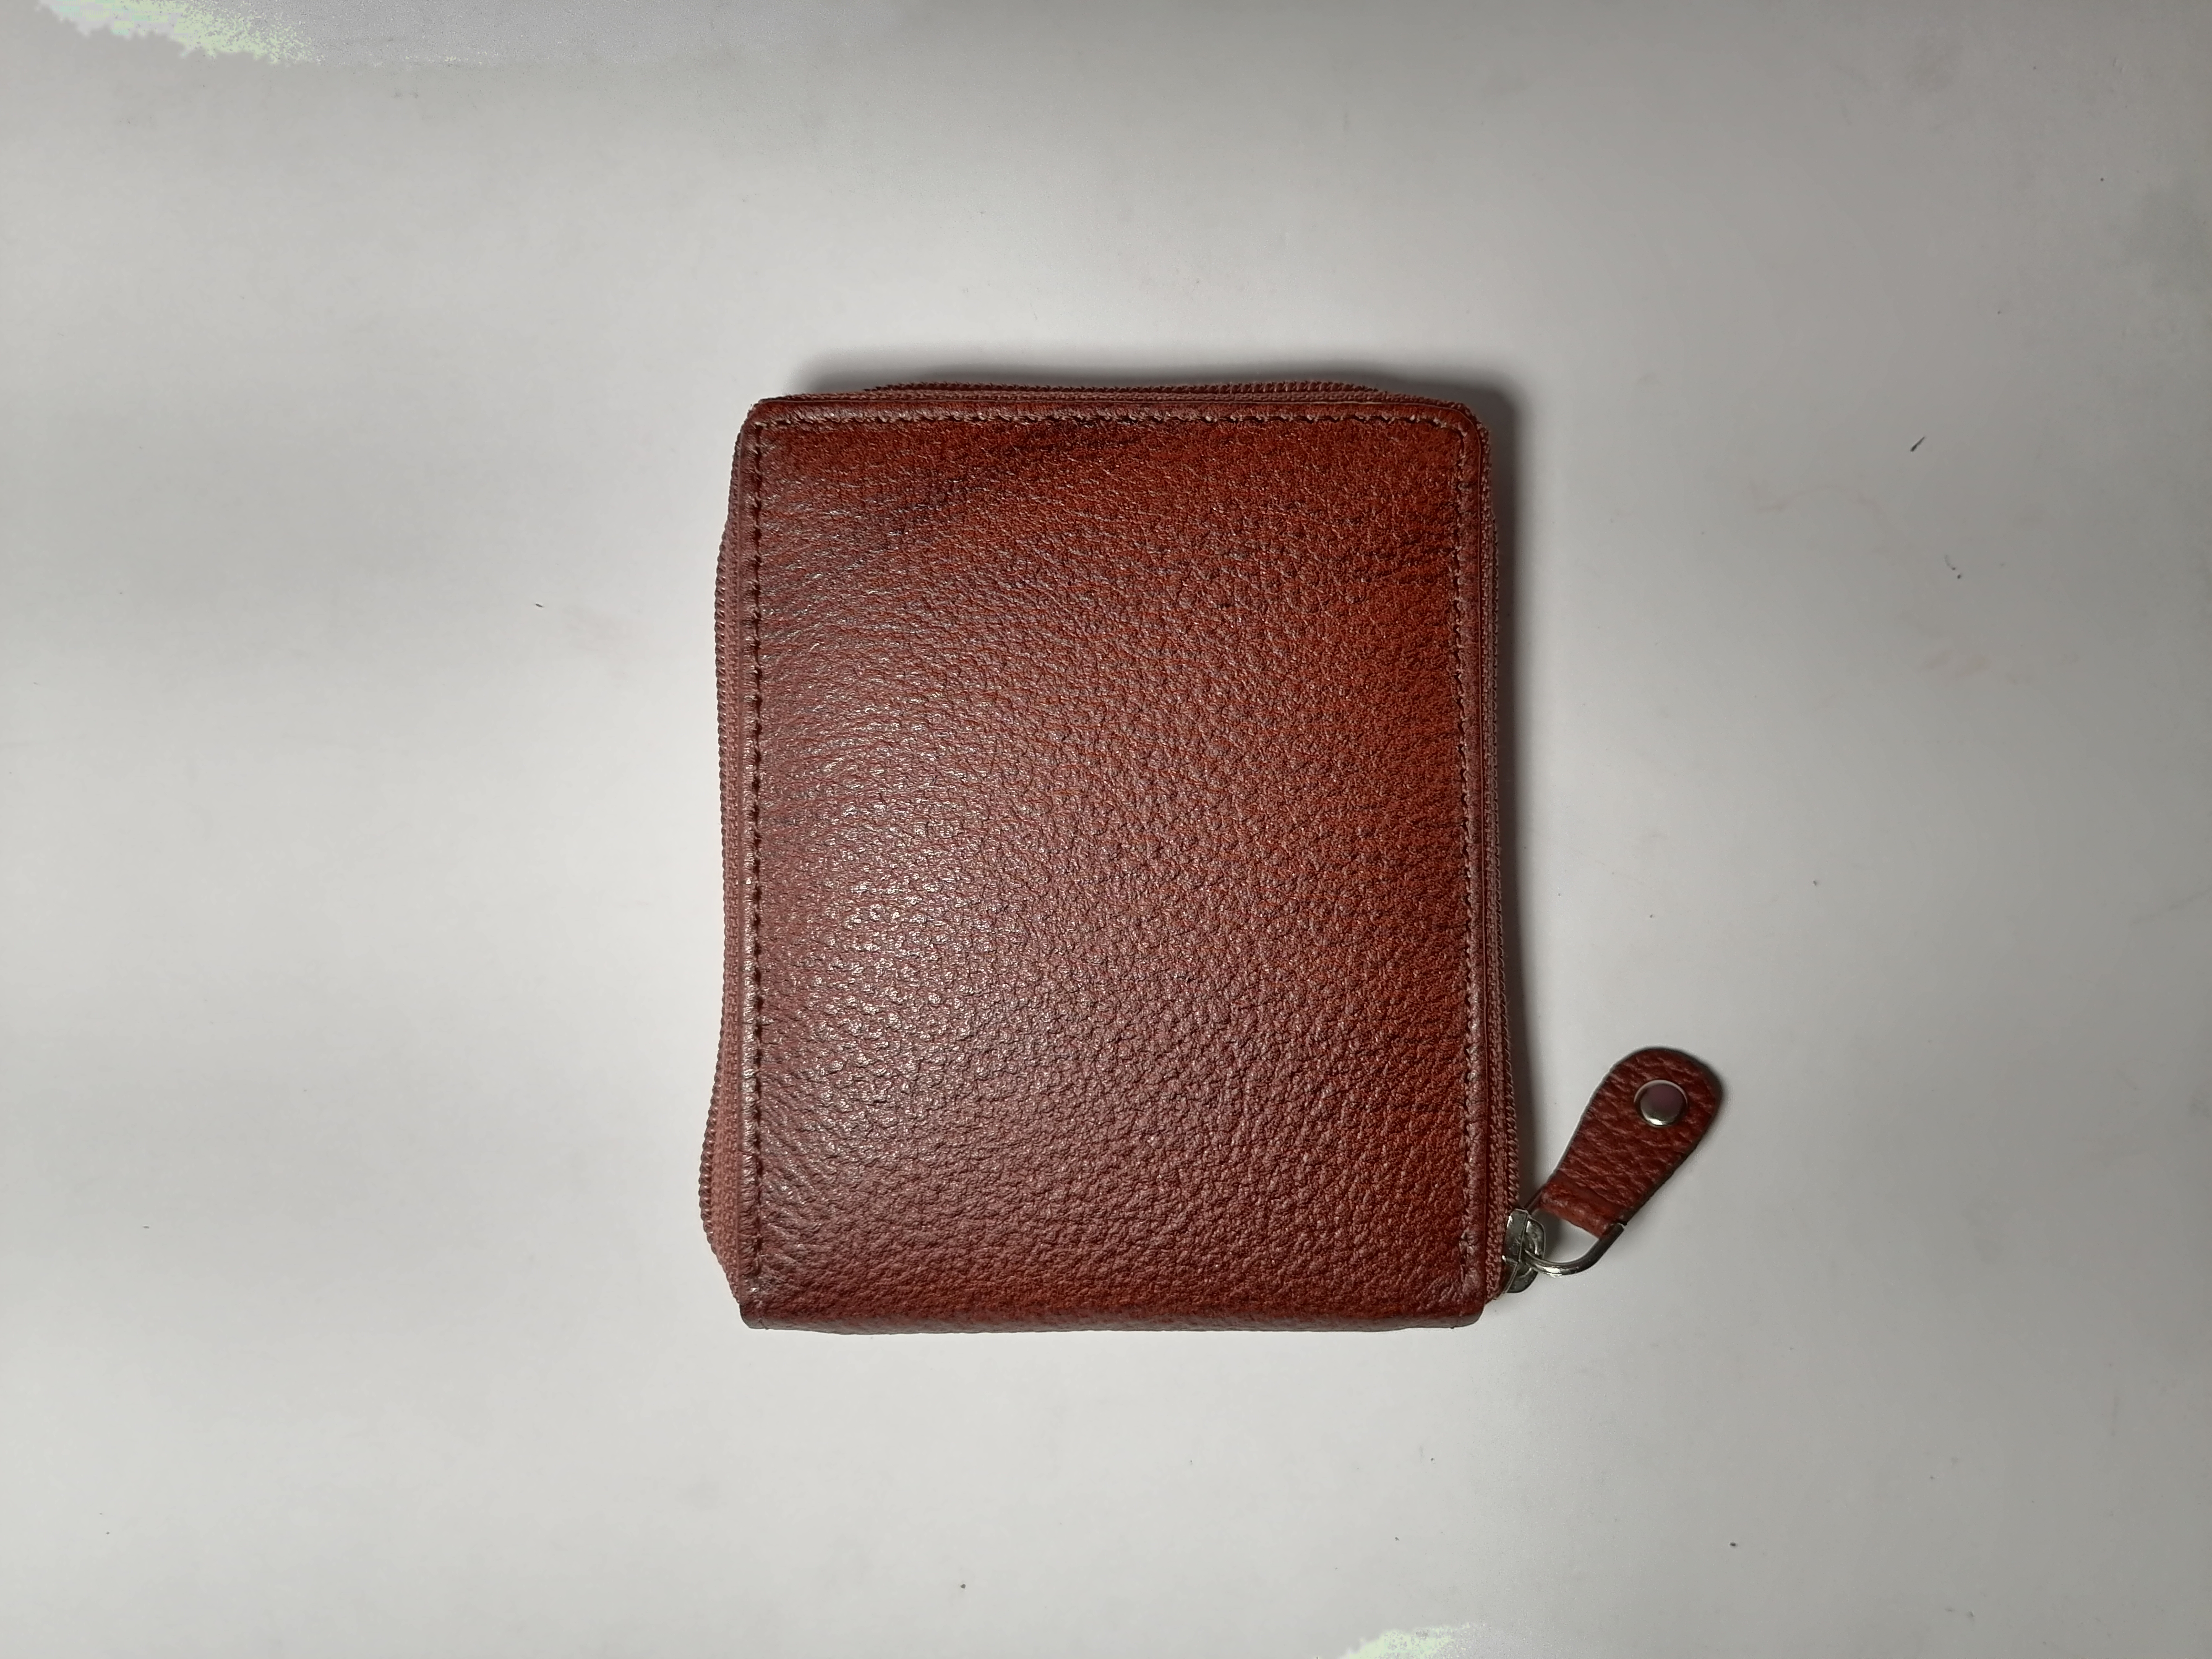 Product image of Round zeeper wallets .(100% Genuine Leather ), price: Rs. 155, ID: round-zeeper-wallets-100-genuine-leather-c4d6ba94